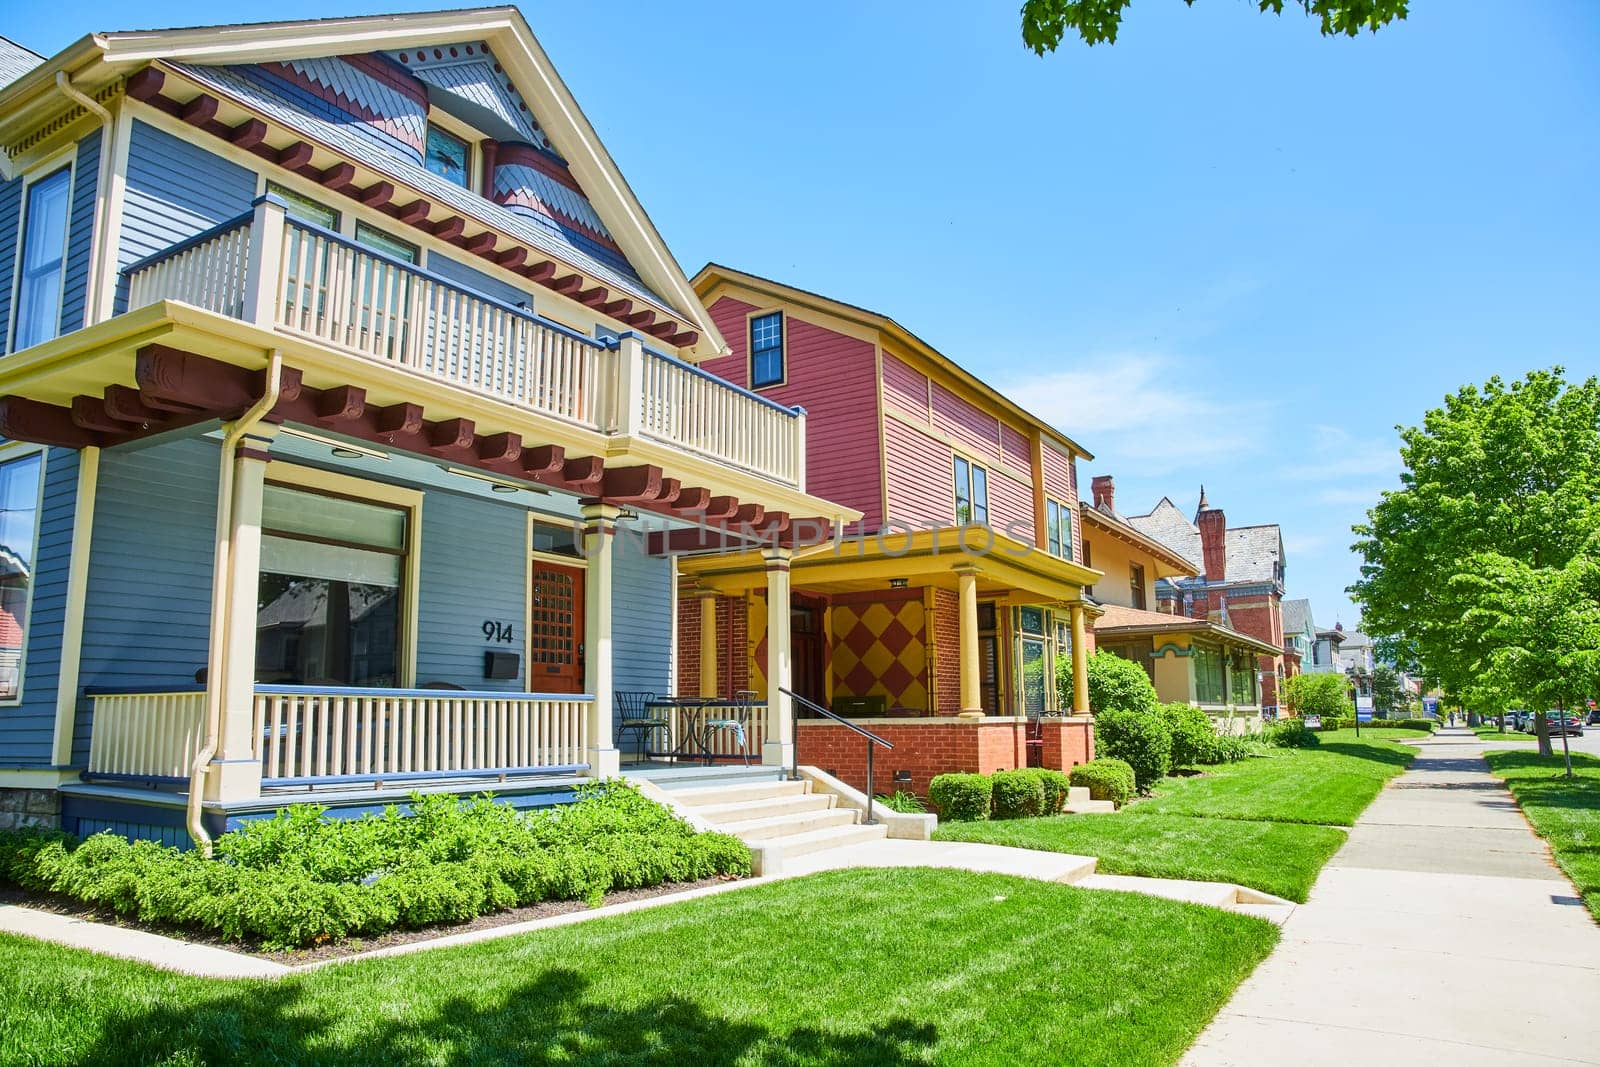 Colorful Victorian homes line a lush, inviting street in Fort Wayne, showcasing community charm and architectural beauty.